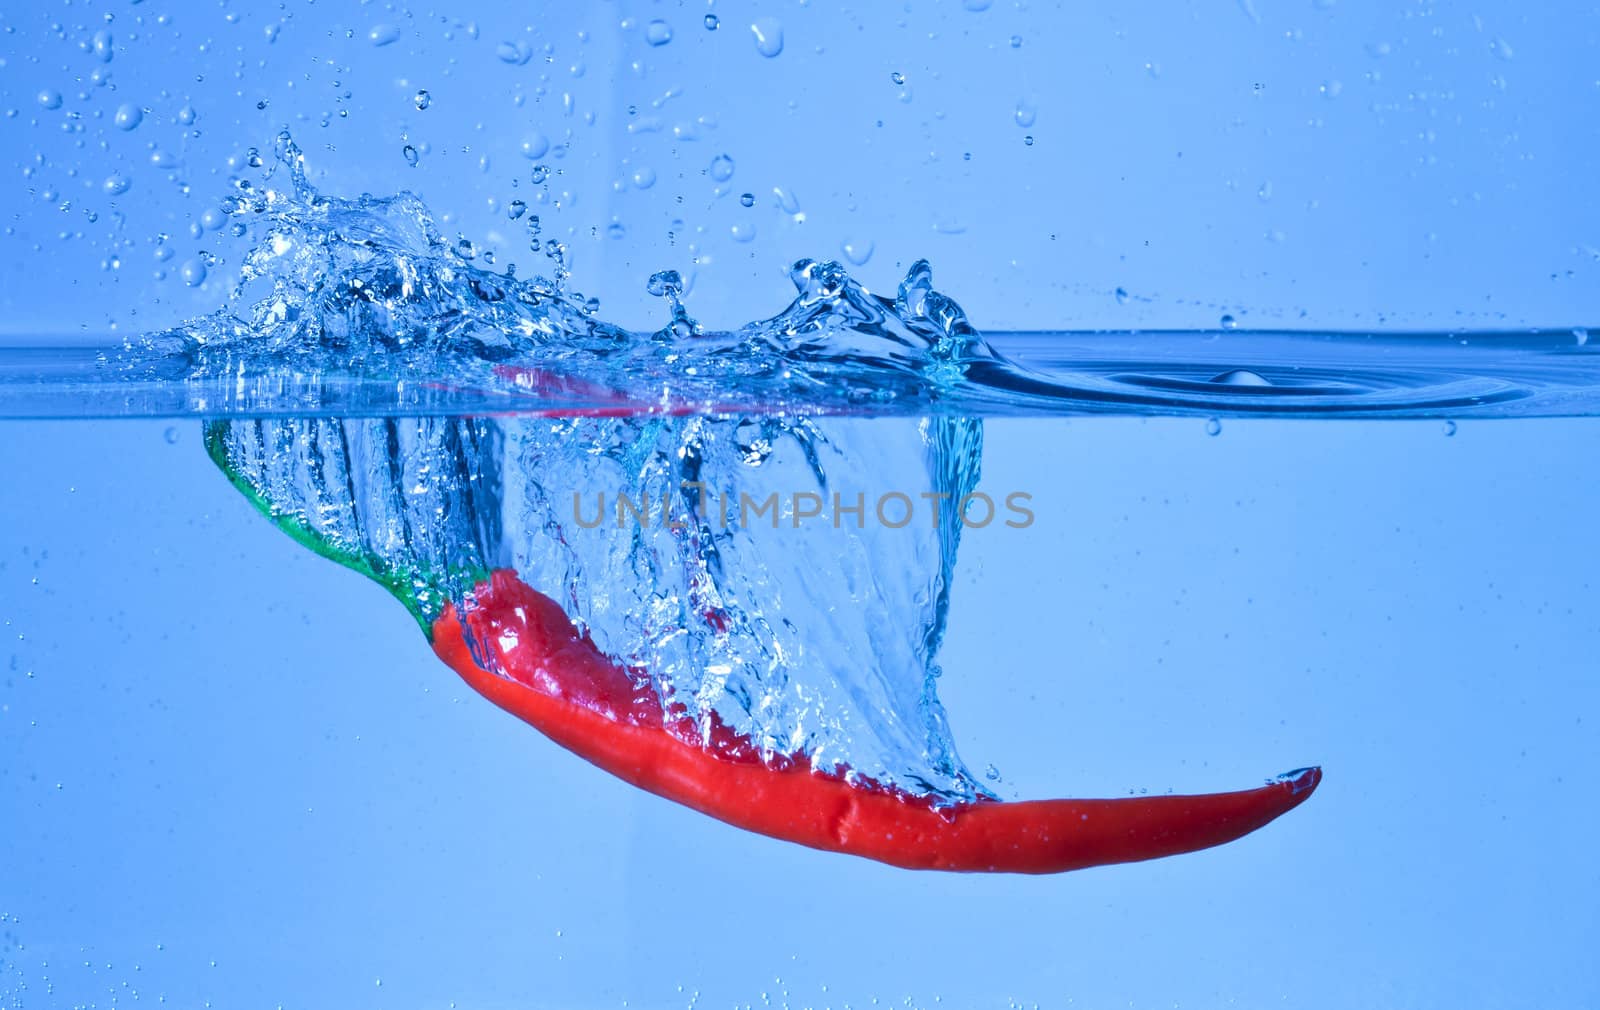 red pepper dropped into water with splash on blue